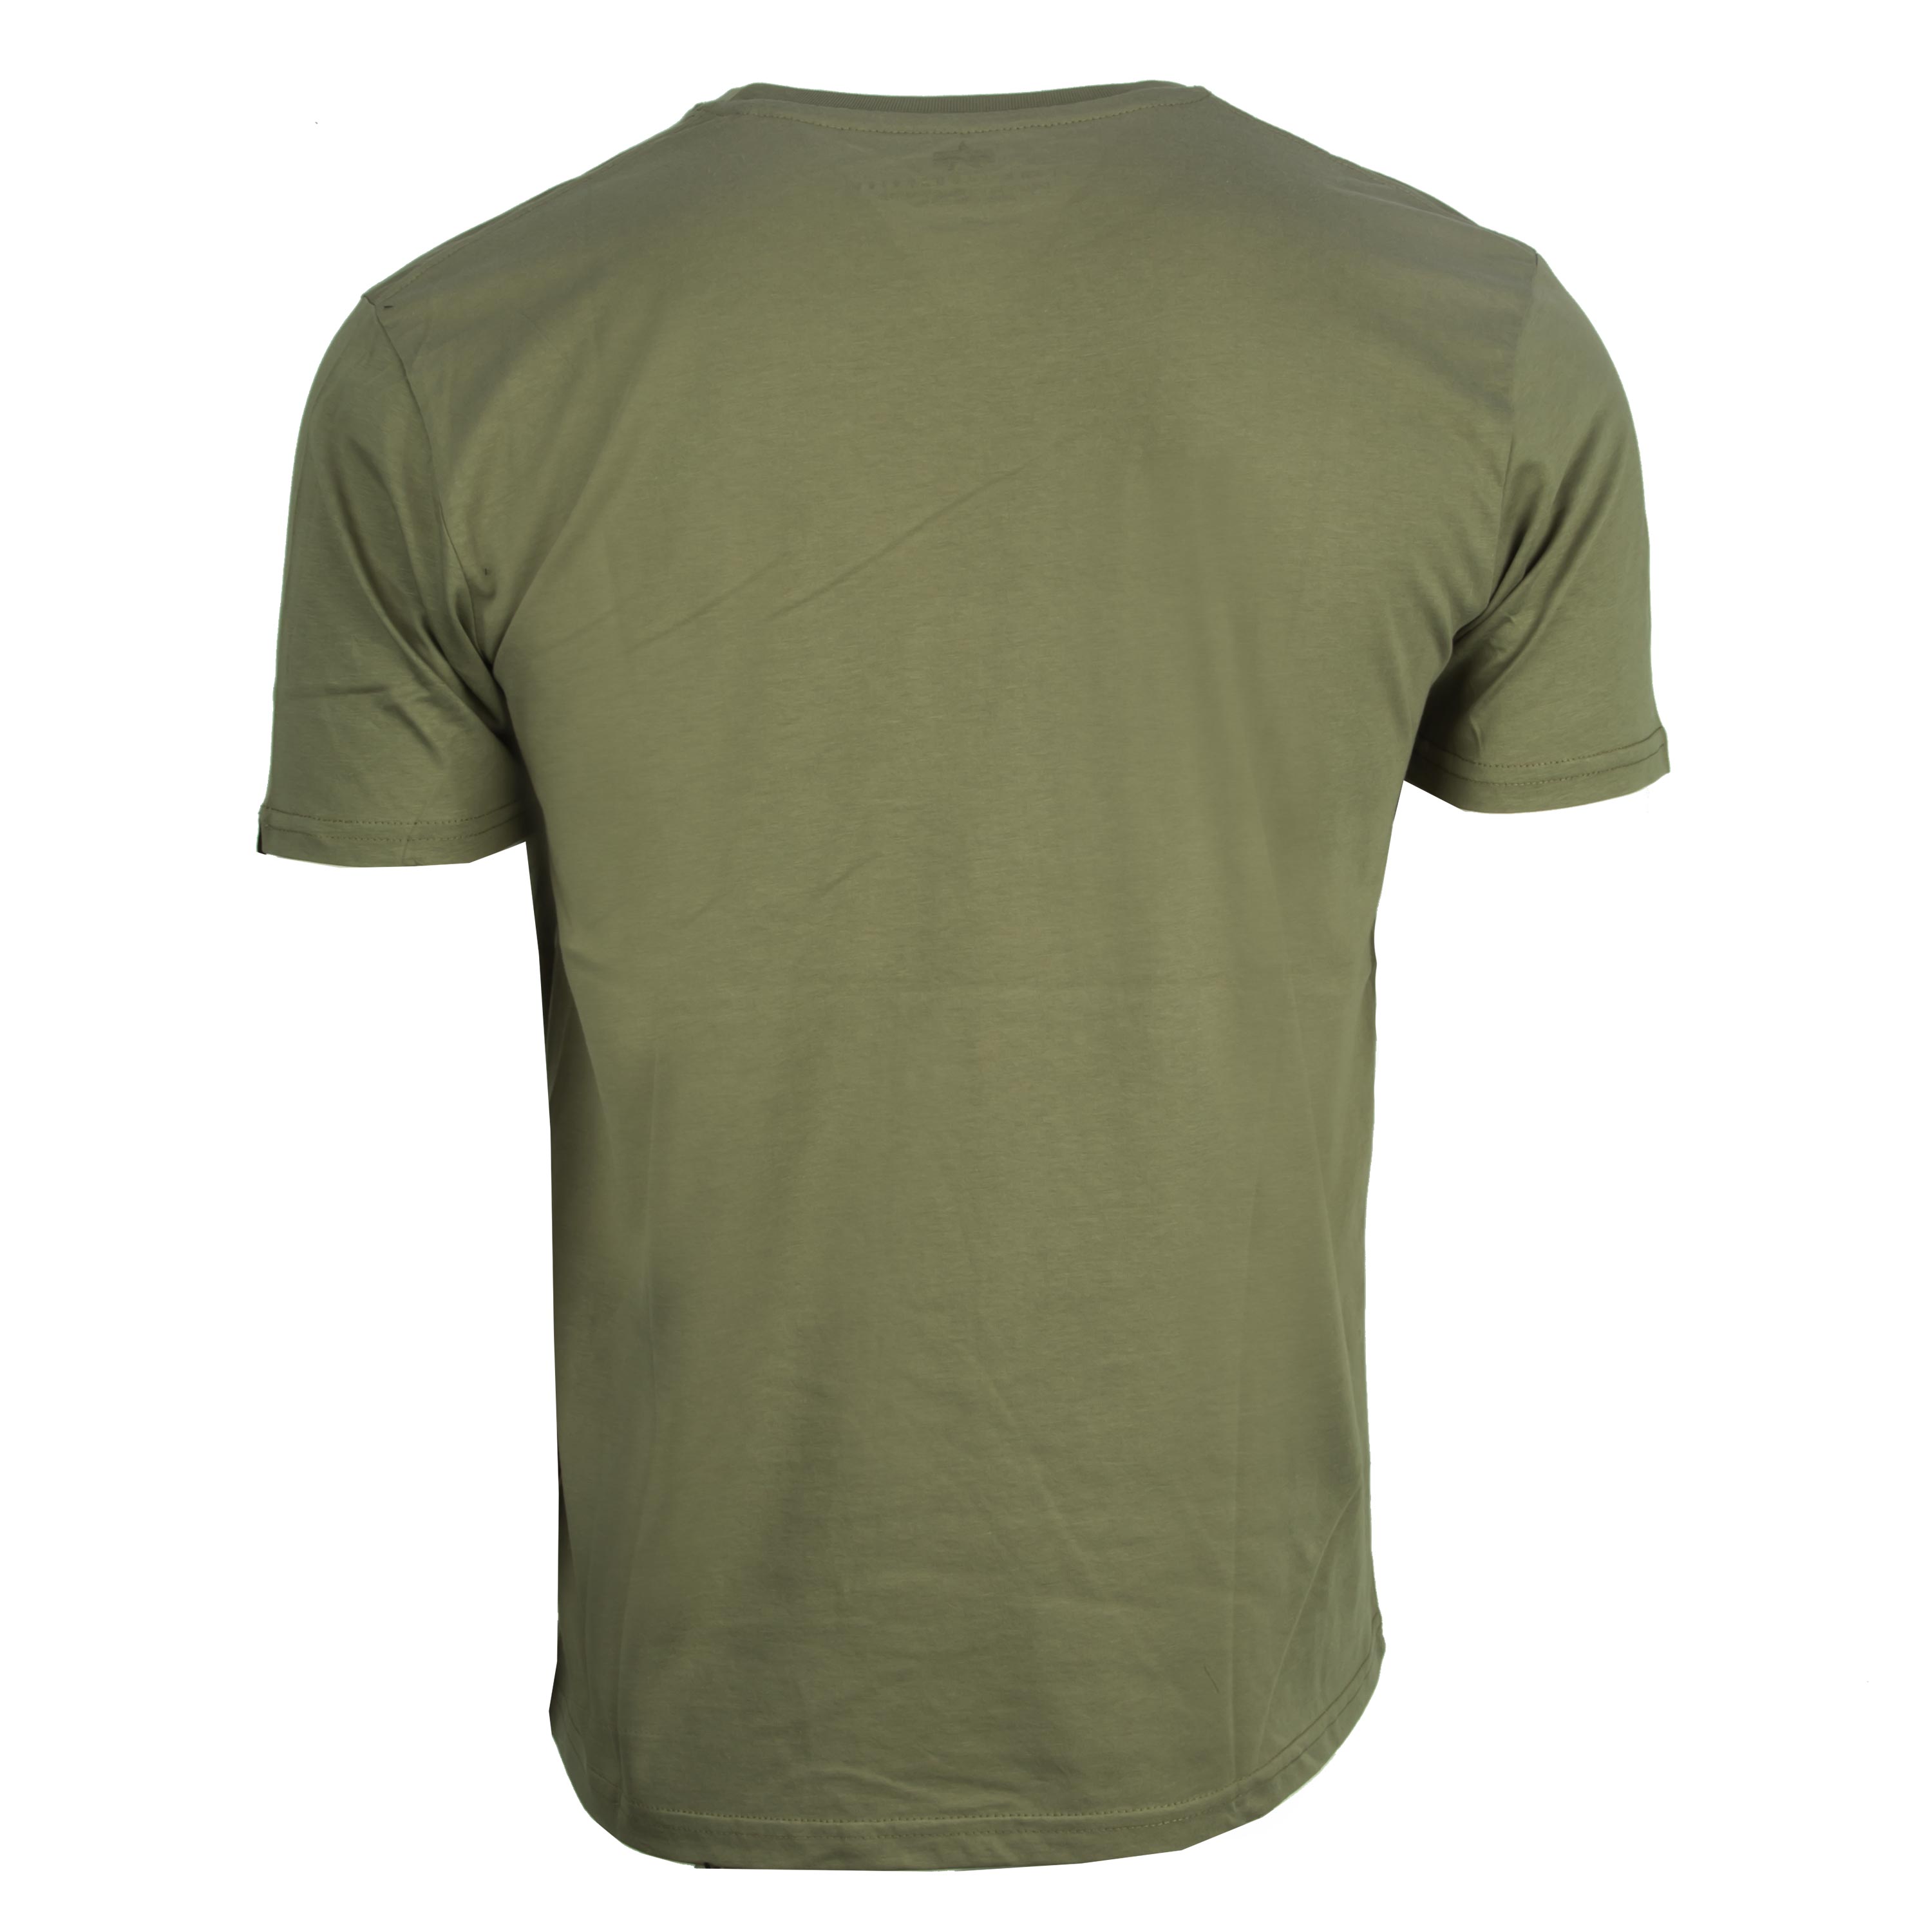 by Alpha ASMC the Industries Purchase olive Basic T-Shirt T